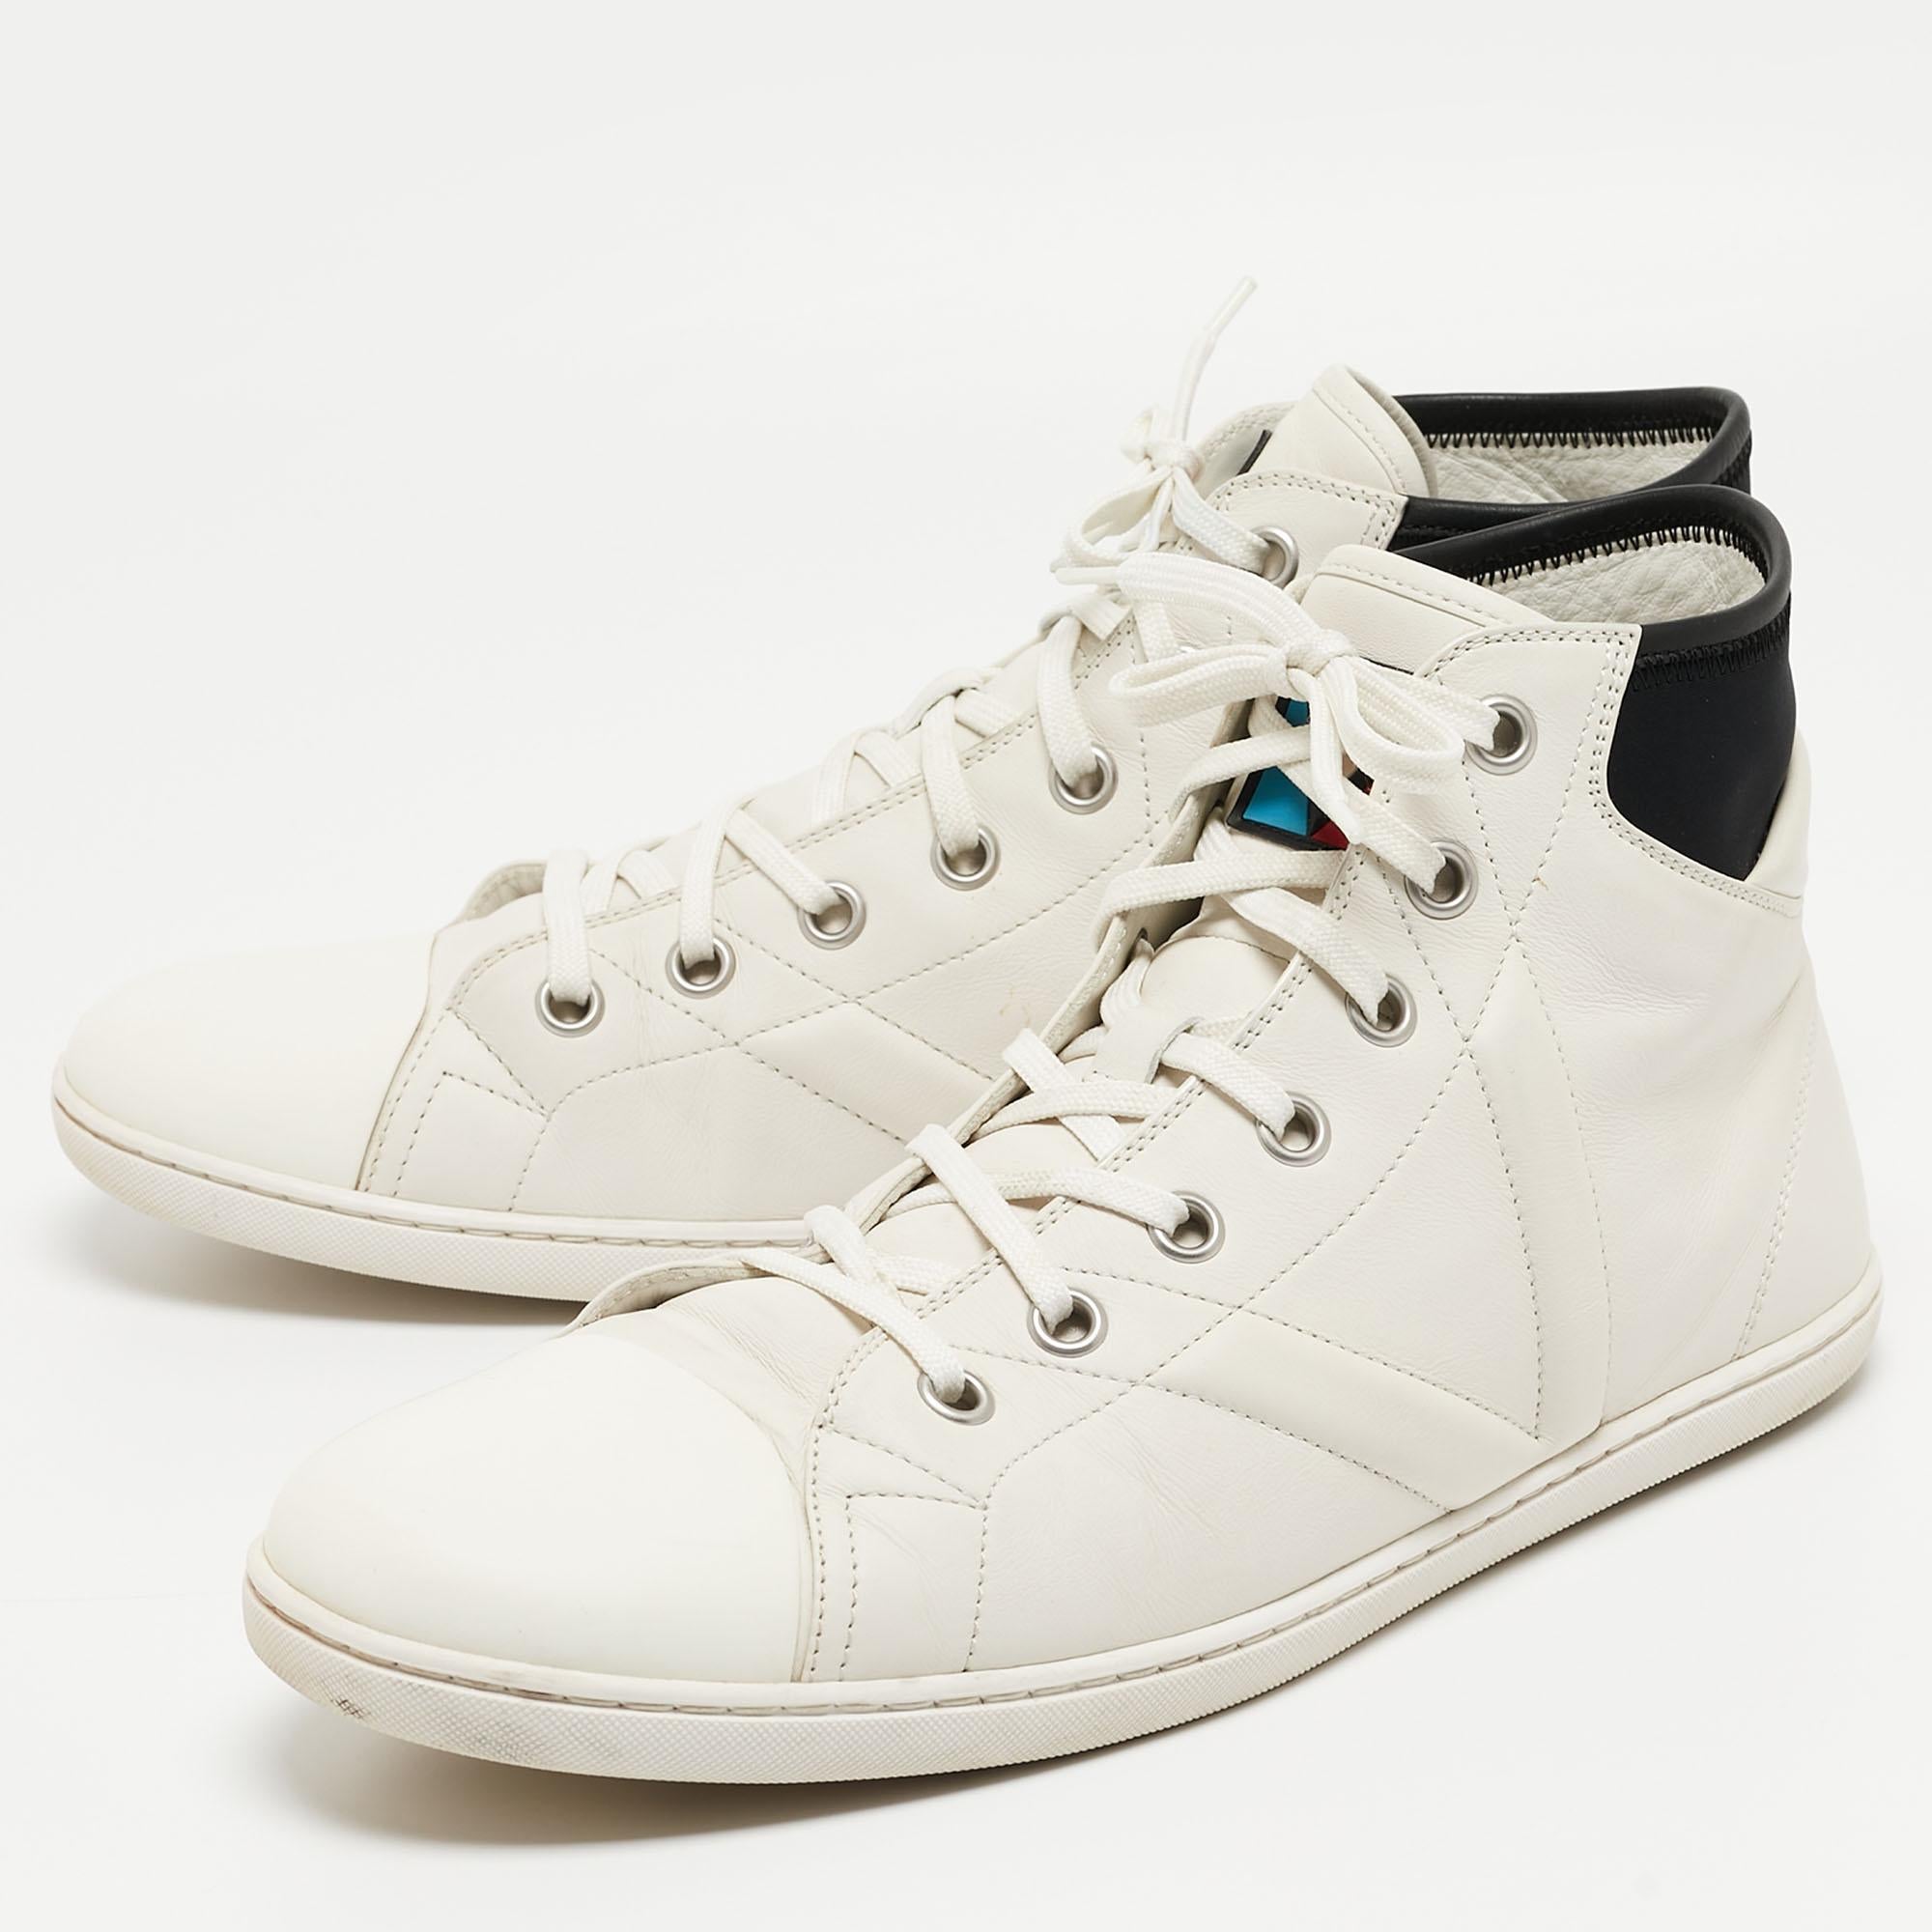 Louis Vuitton White/Black Leather Trainer High Top Sneakers Size 42.5 For Sale 1